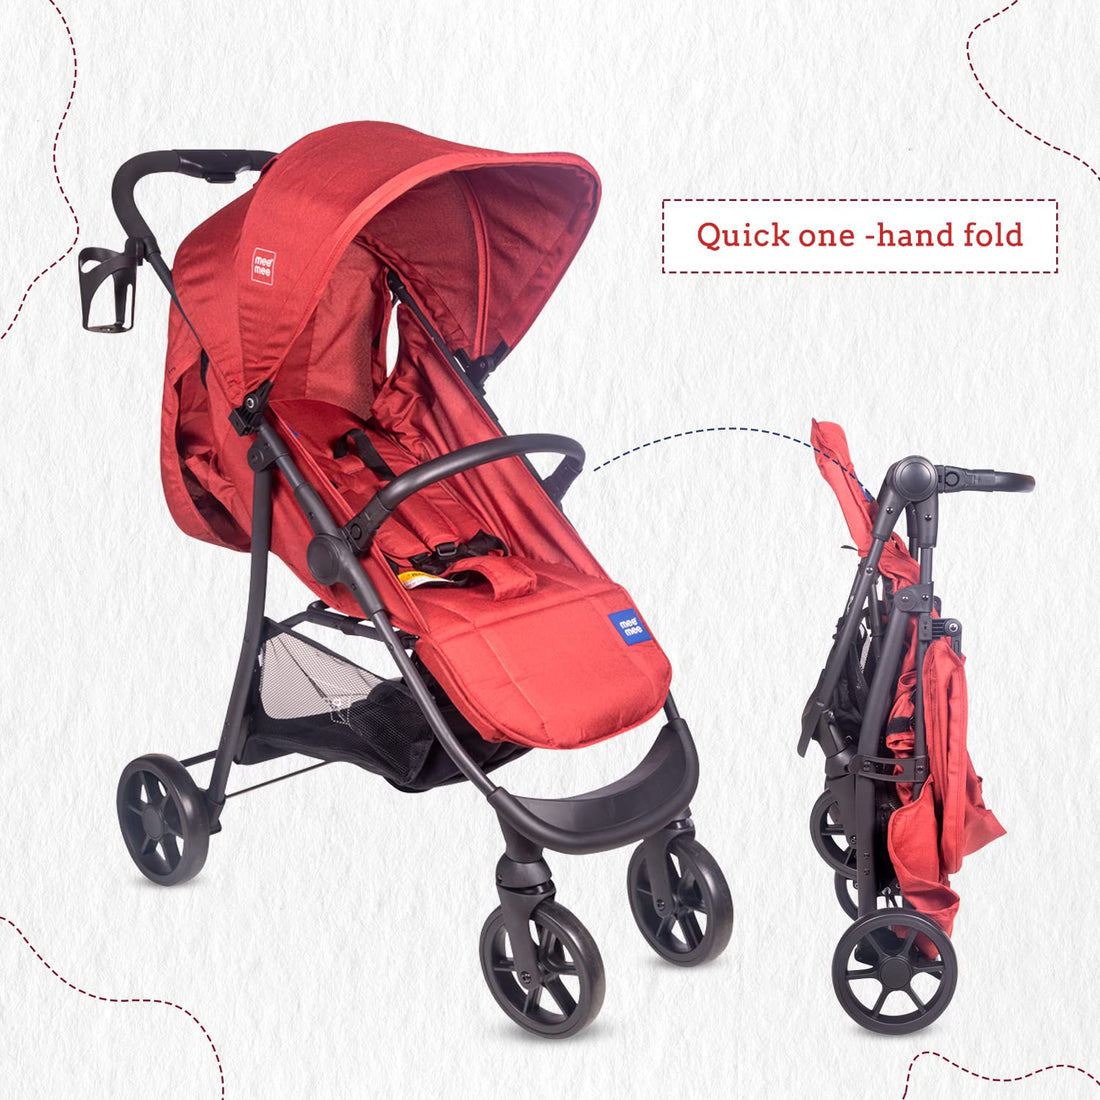 Mee Mee - Quick one-hand fold, easy and compact for carrying Baby Stroller